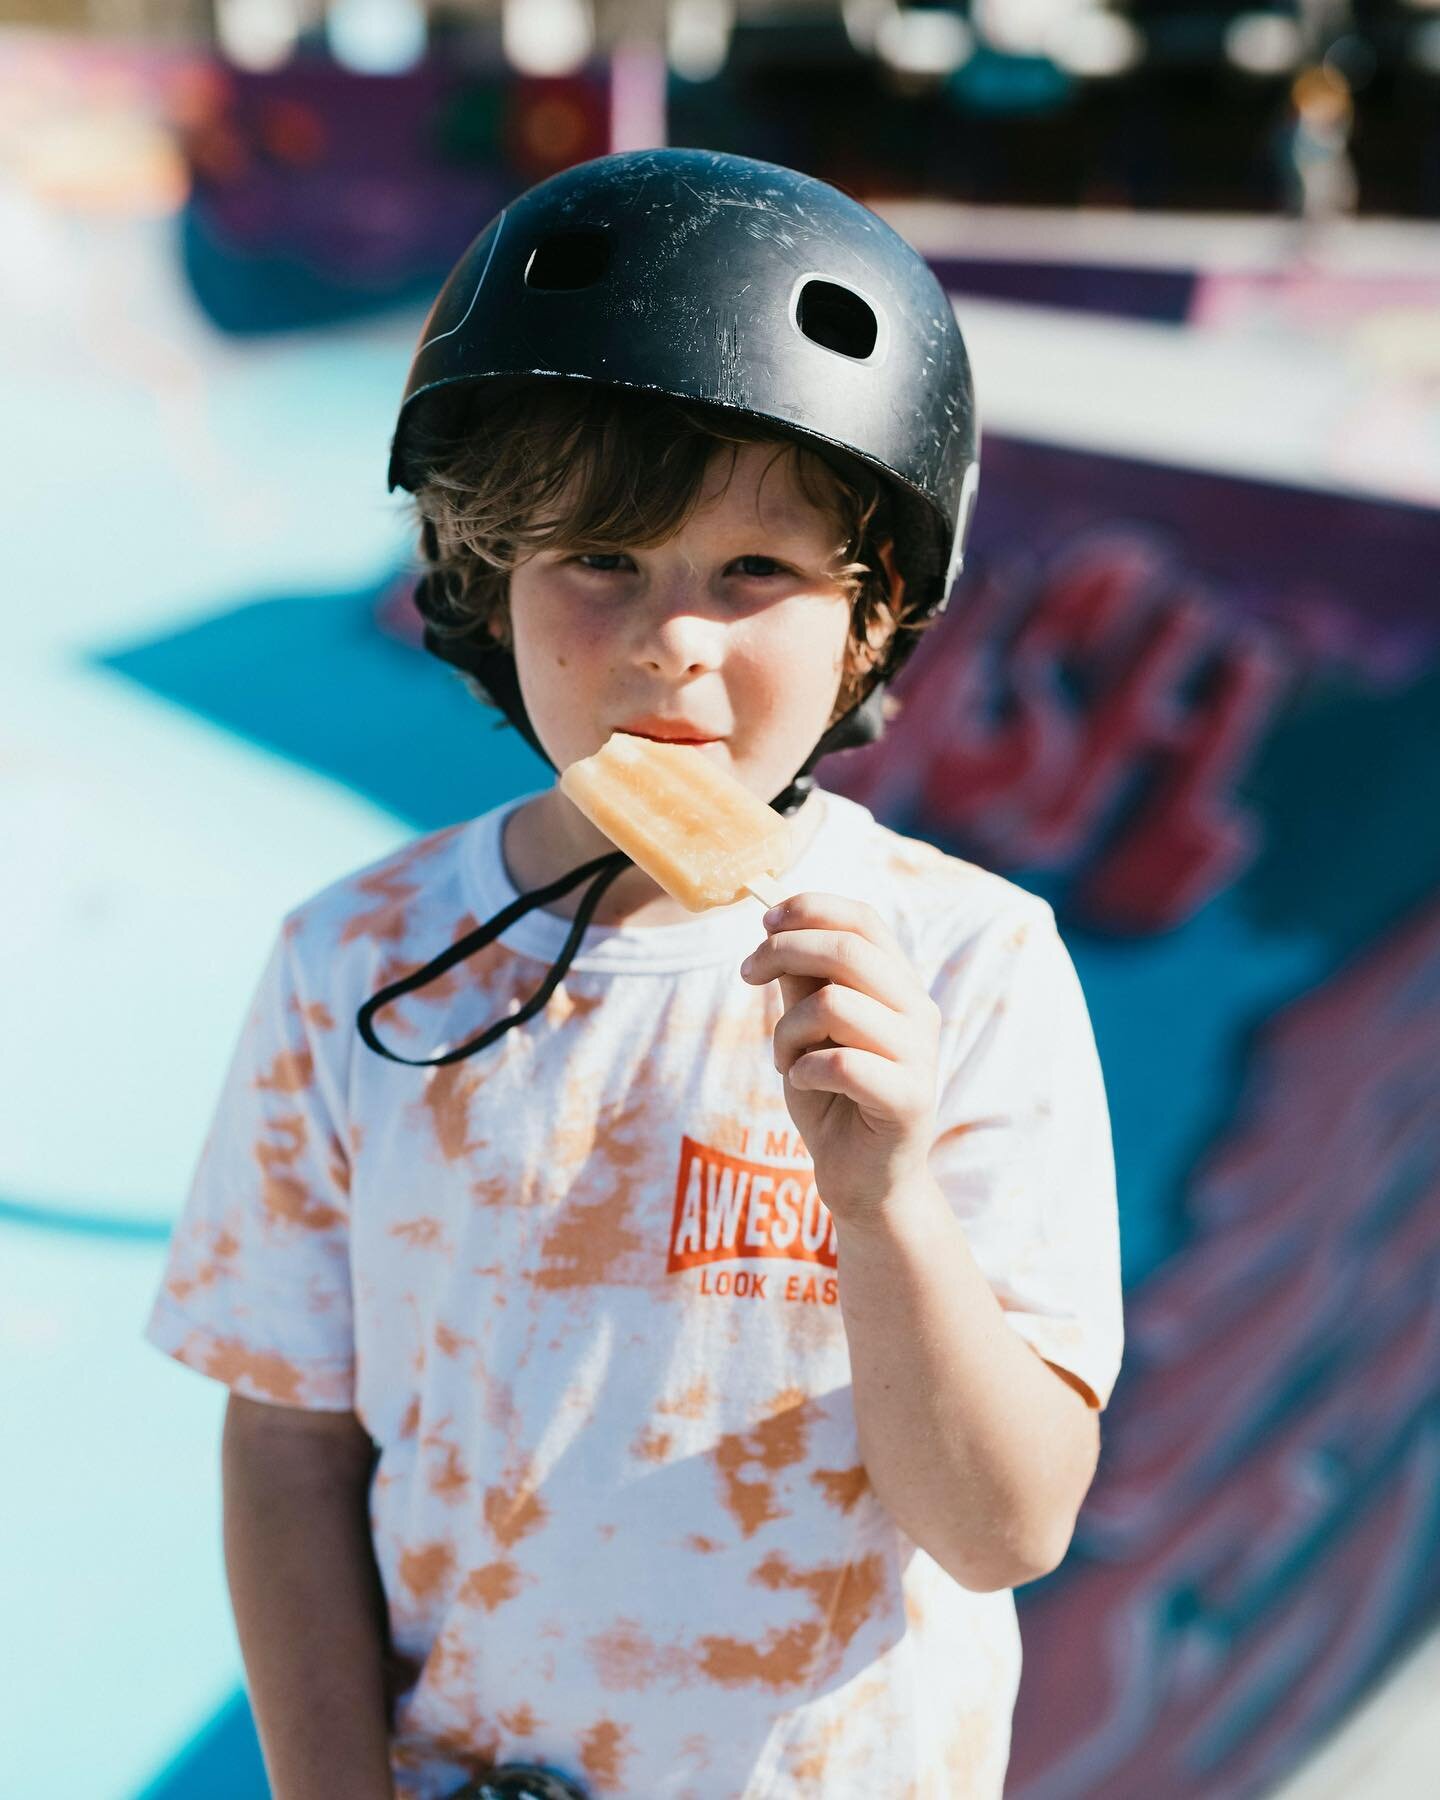 Today, Nesters Squamish is hosting their Spring BBQ Sat May 13, 10-2pm. Cool off with a Probiotic Popsicle. And local fans, the good news is, Nesters has restocked our pops!